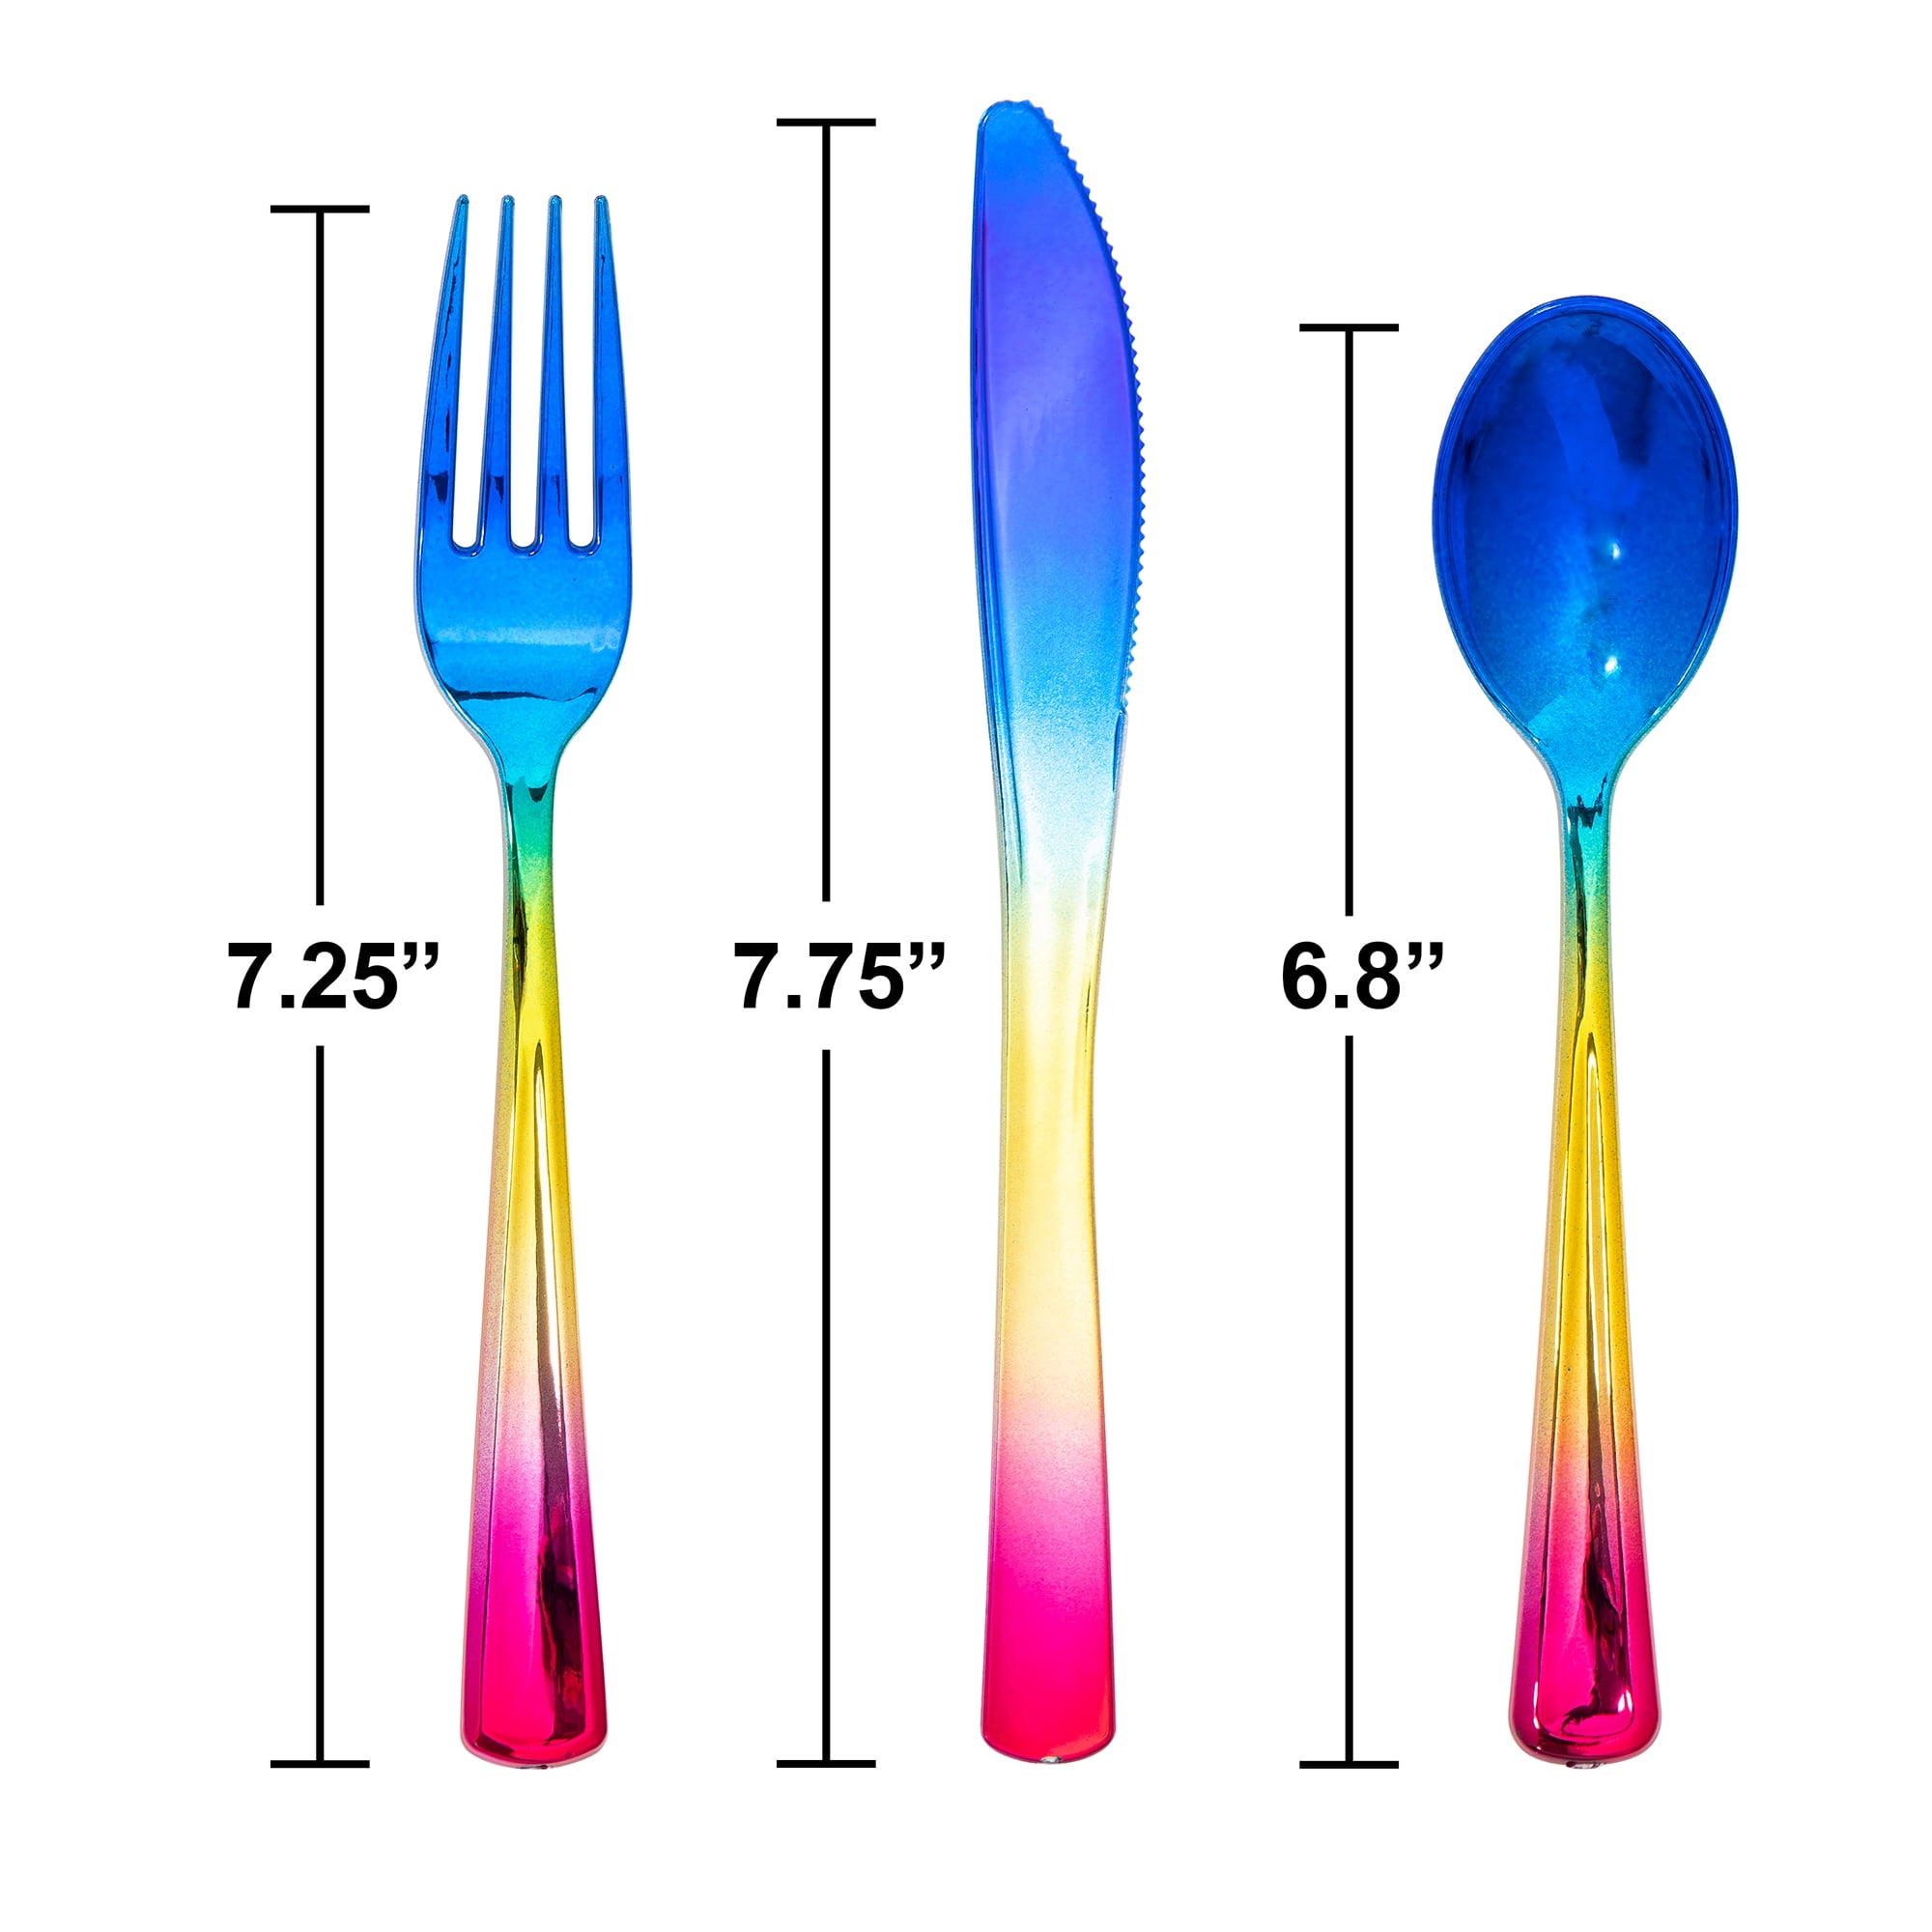 Outline Rainbow cutlery, small fork knife and spoon & big items.